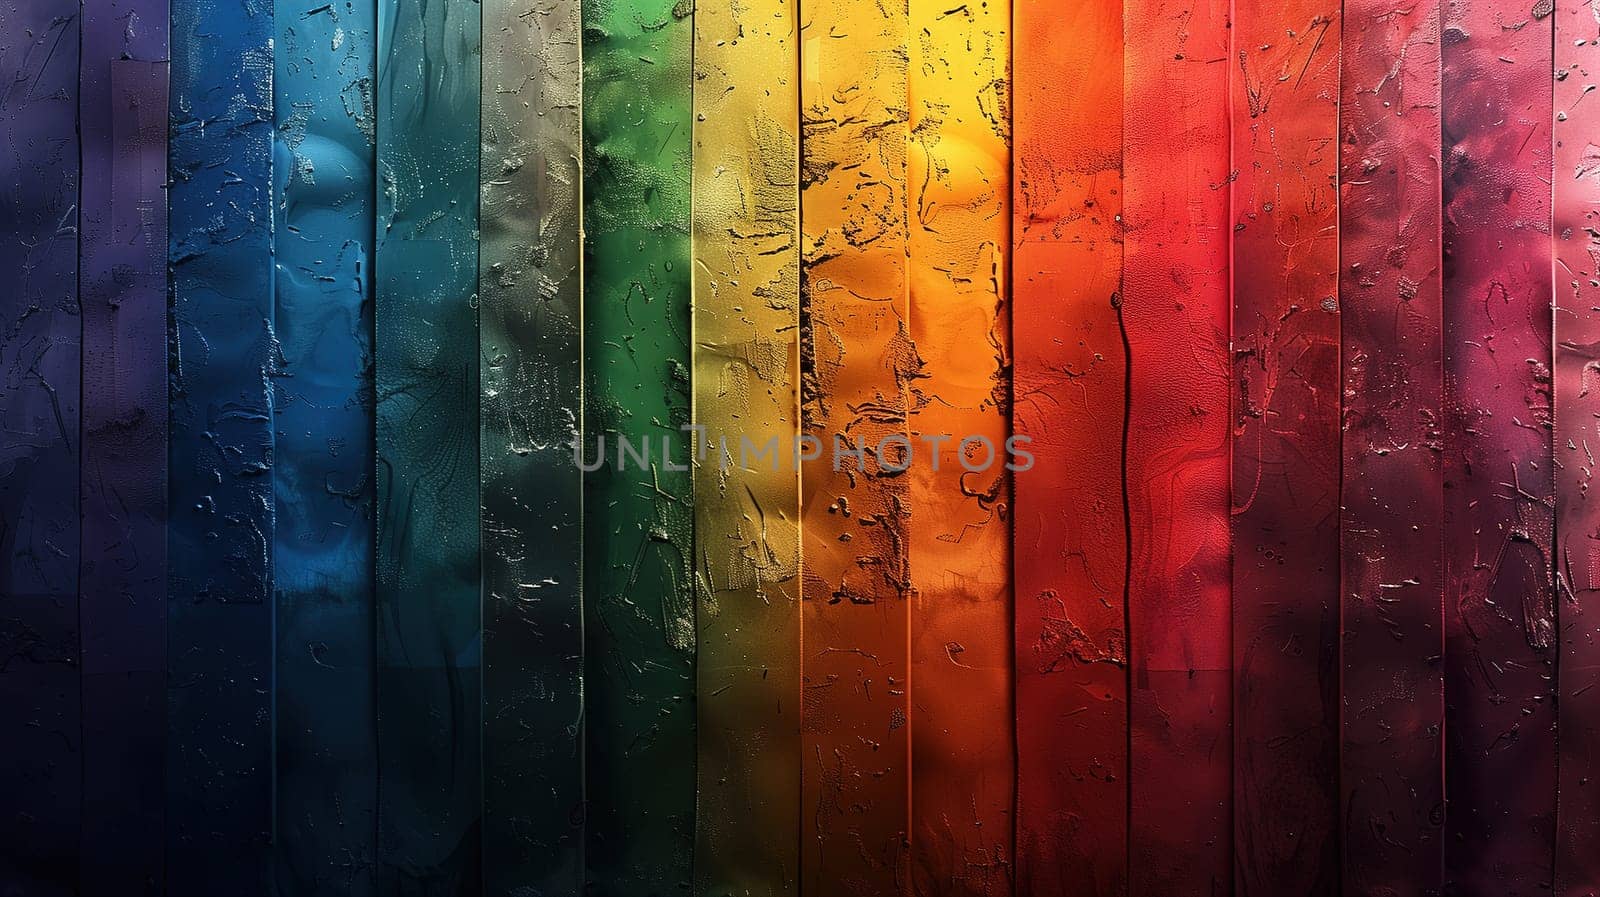 A spectrum of vivid rainbow colors streaks down a wet, reflective surface, symbolizing the diversity and vibrancy of the LGBT community. The droplets of water add texture and depth, enhancing the overall visual representation of pride and inclusivity.